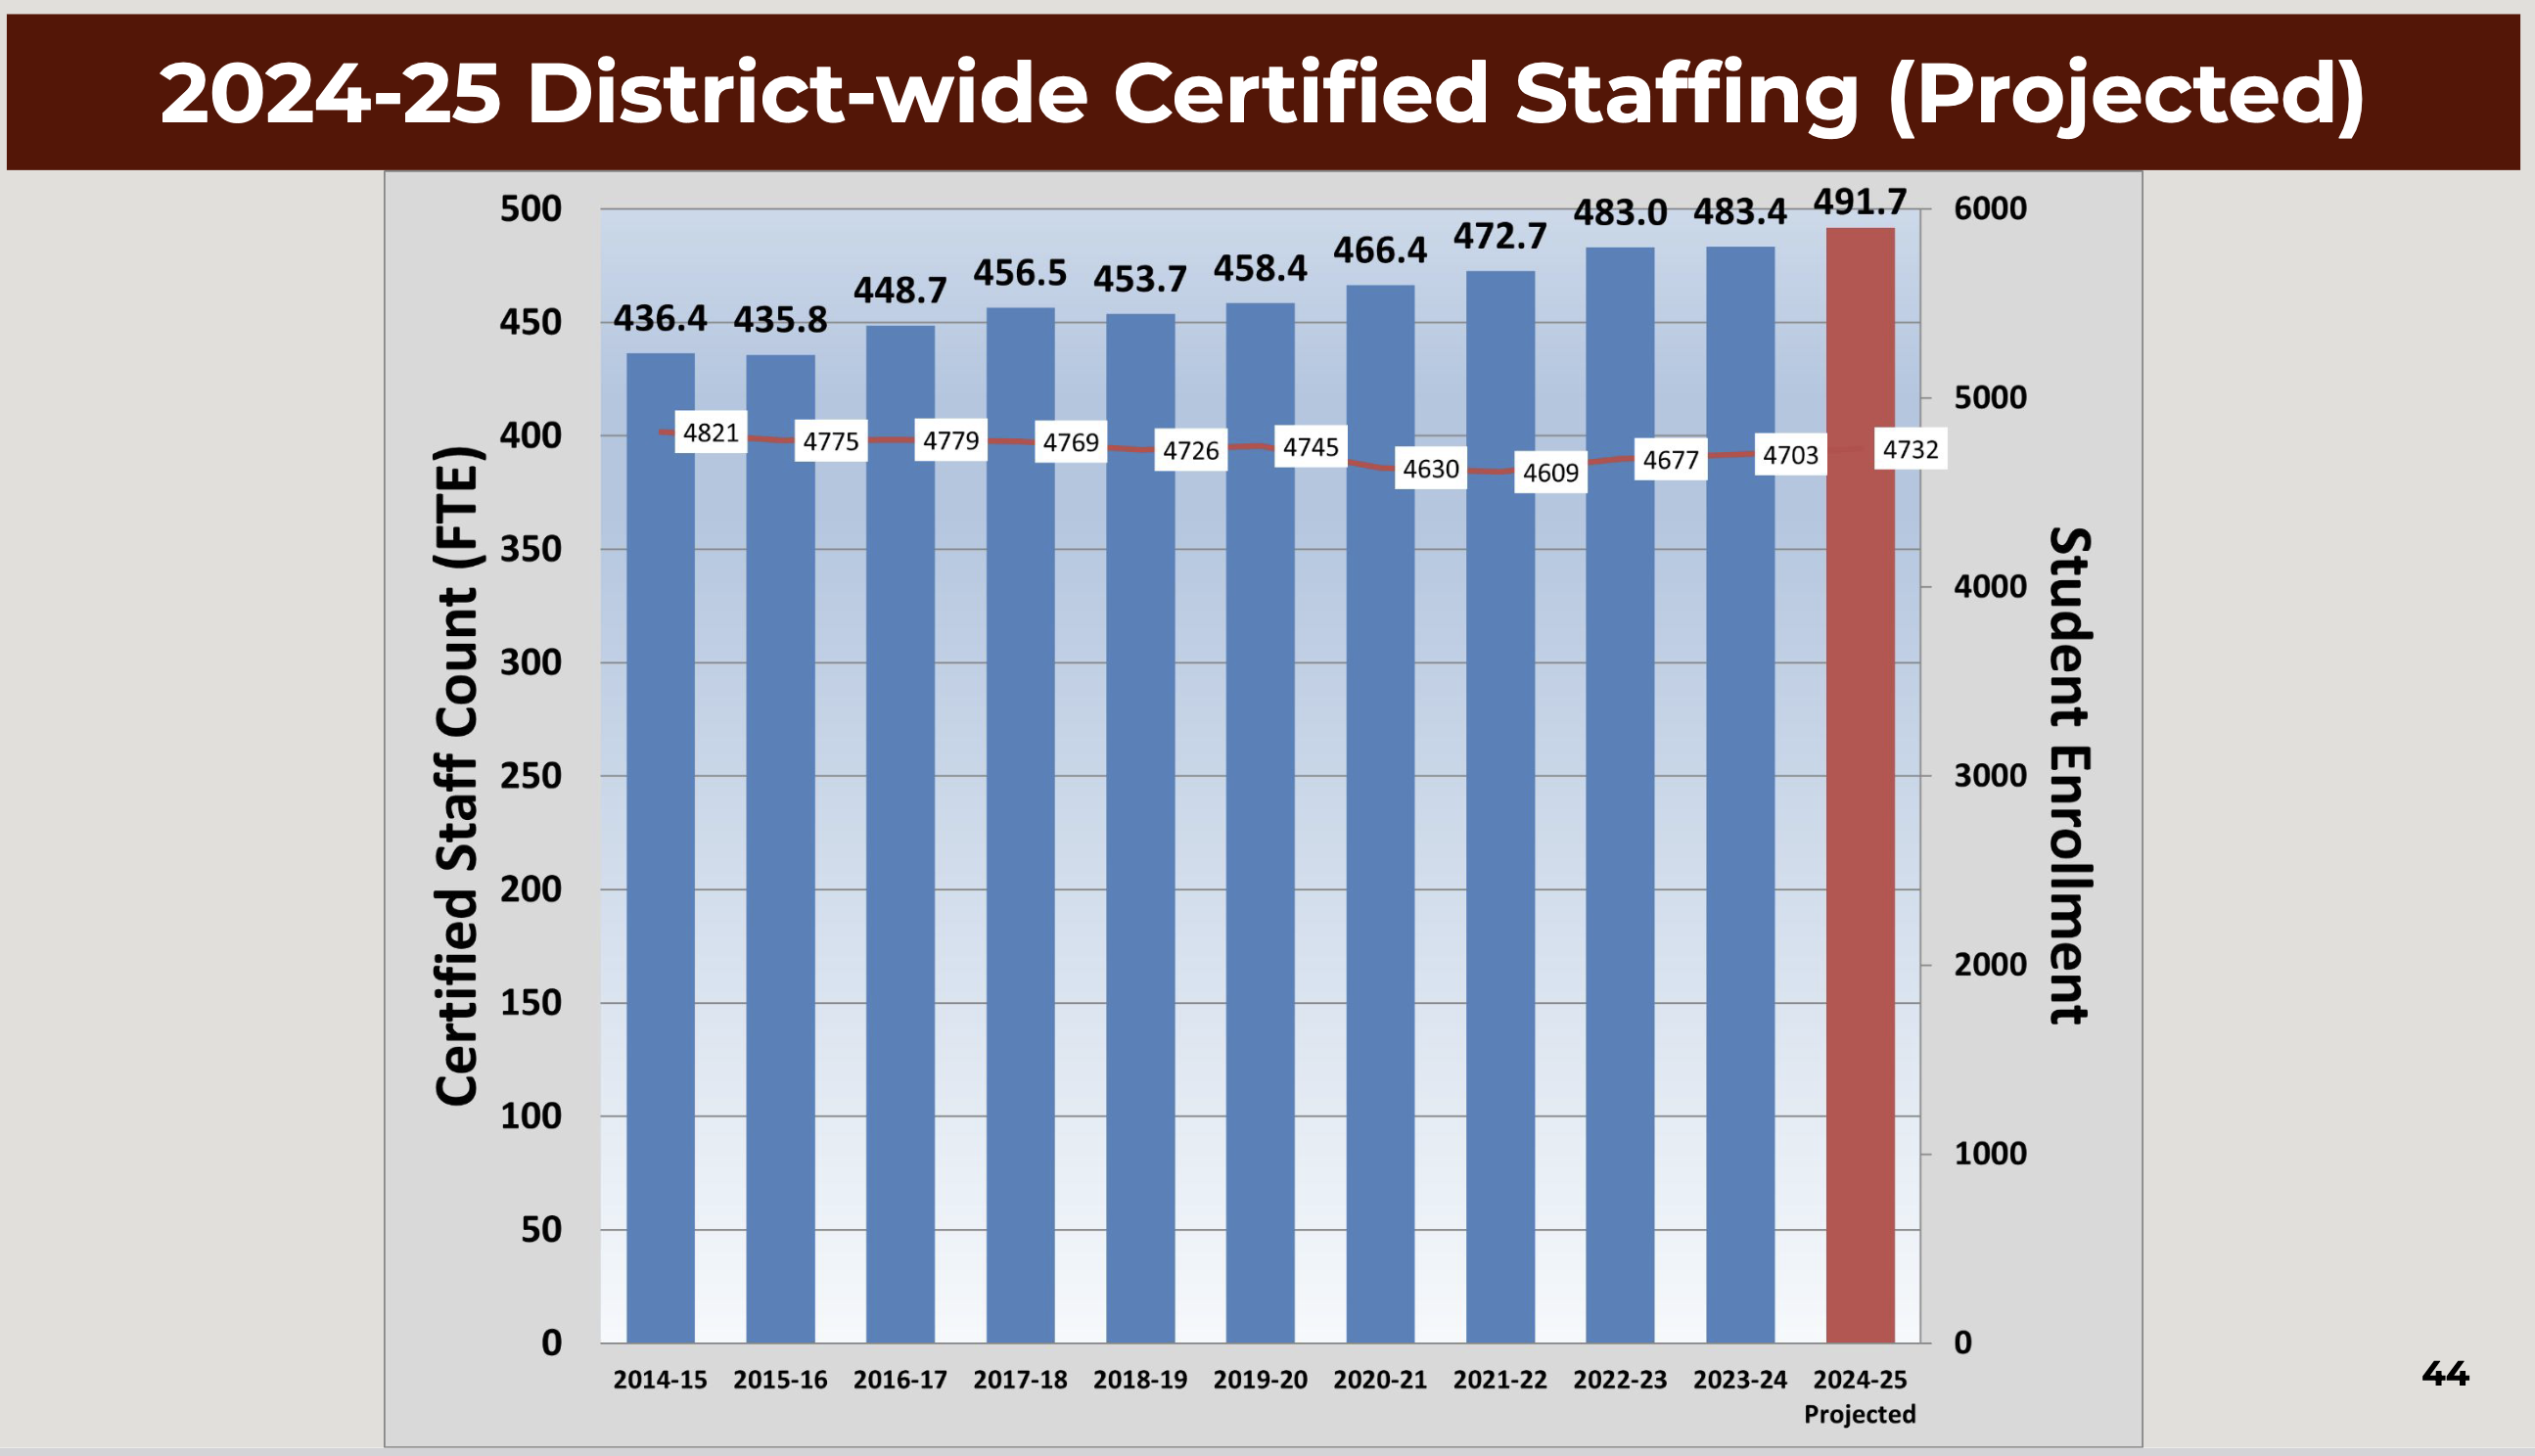 projected staffing